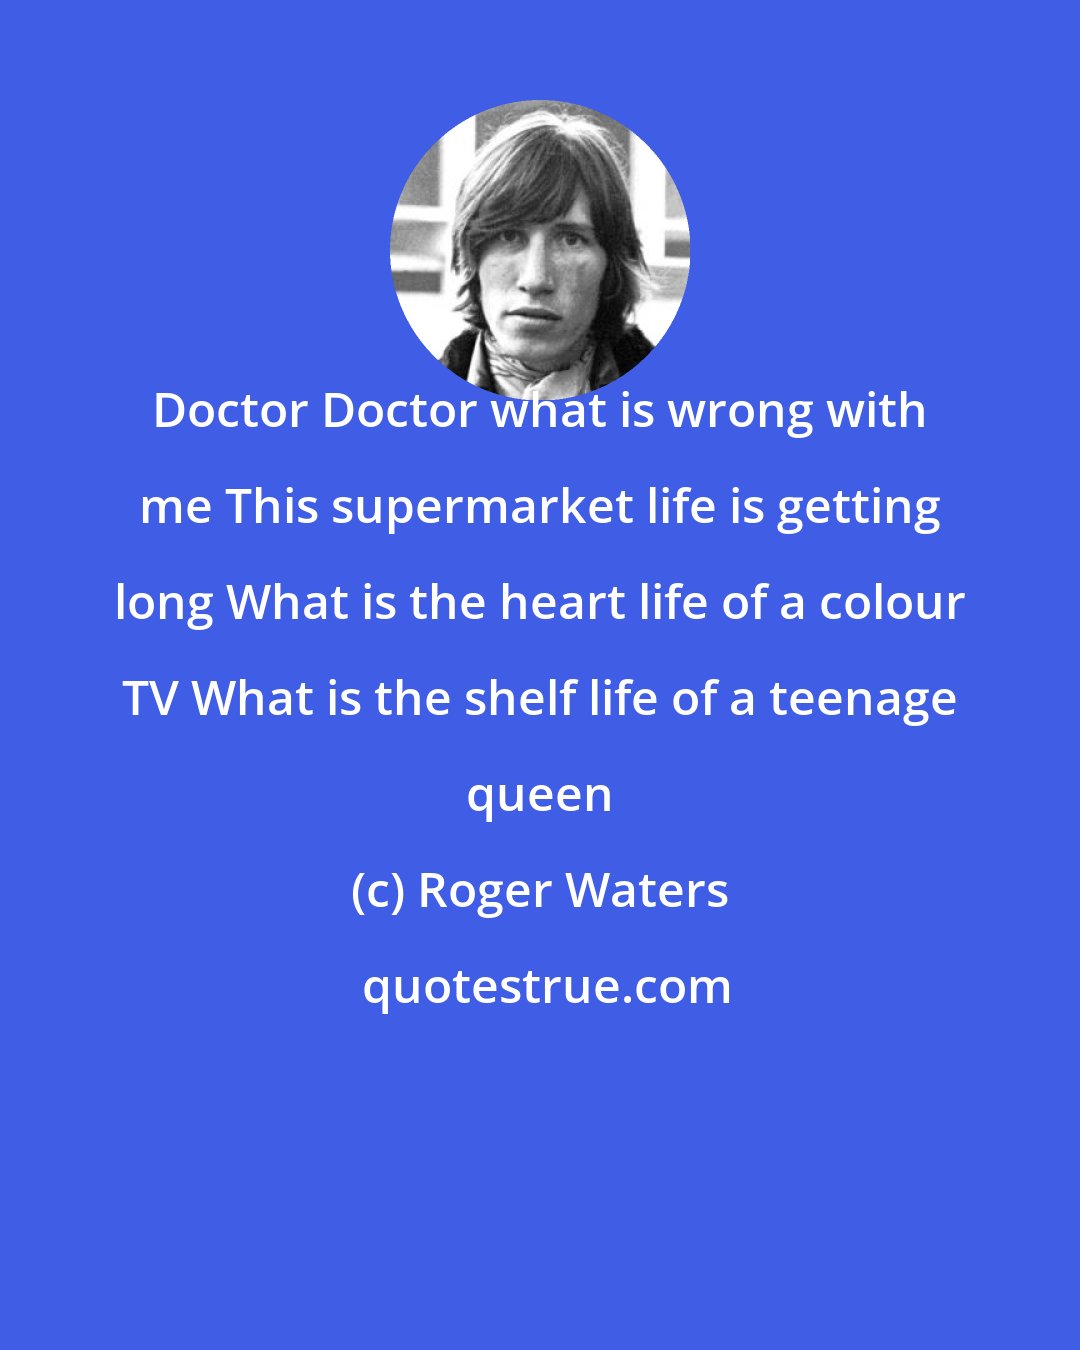 Roger Waters: Doctor Doctor what is wrong with me This supermarket life is getting long What is the heart life of a colour TV What is the shelf life of a teenage queen